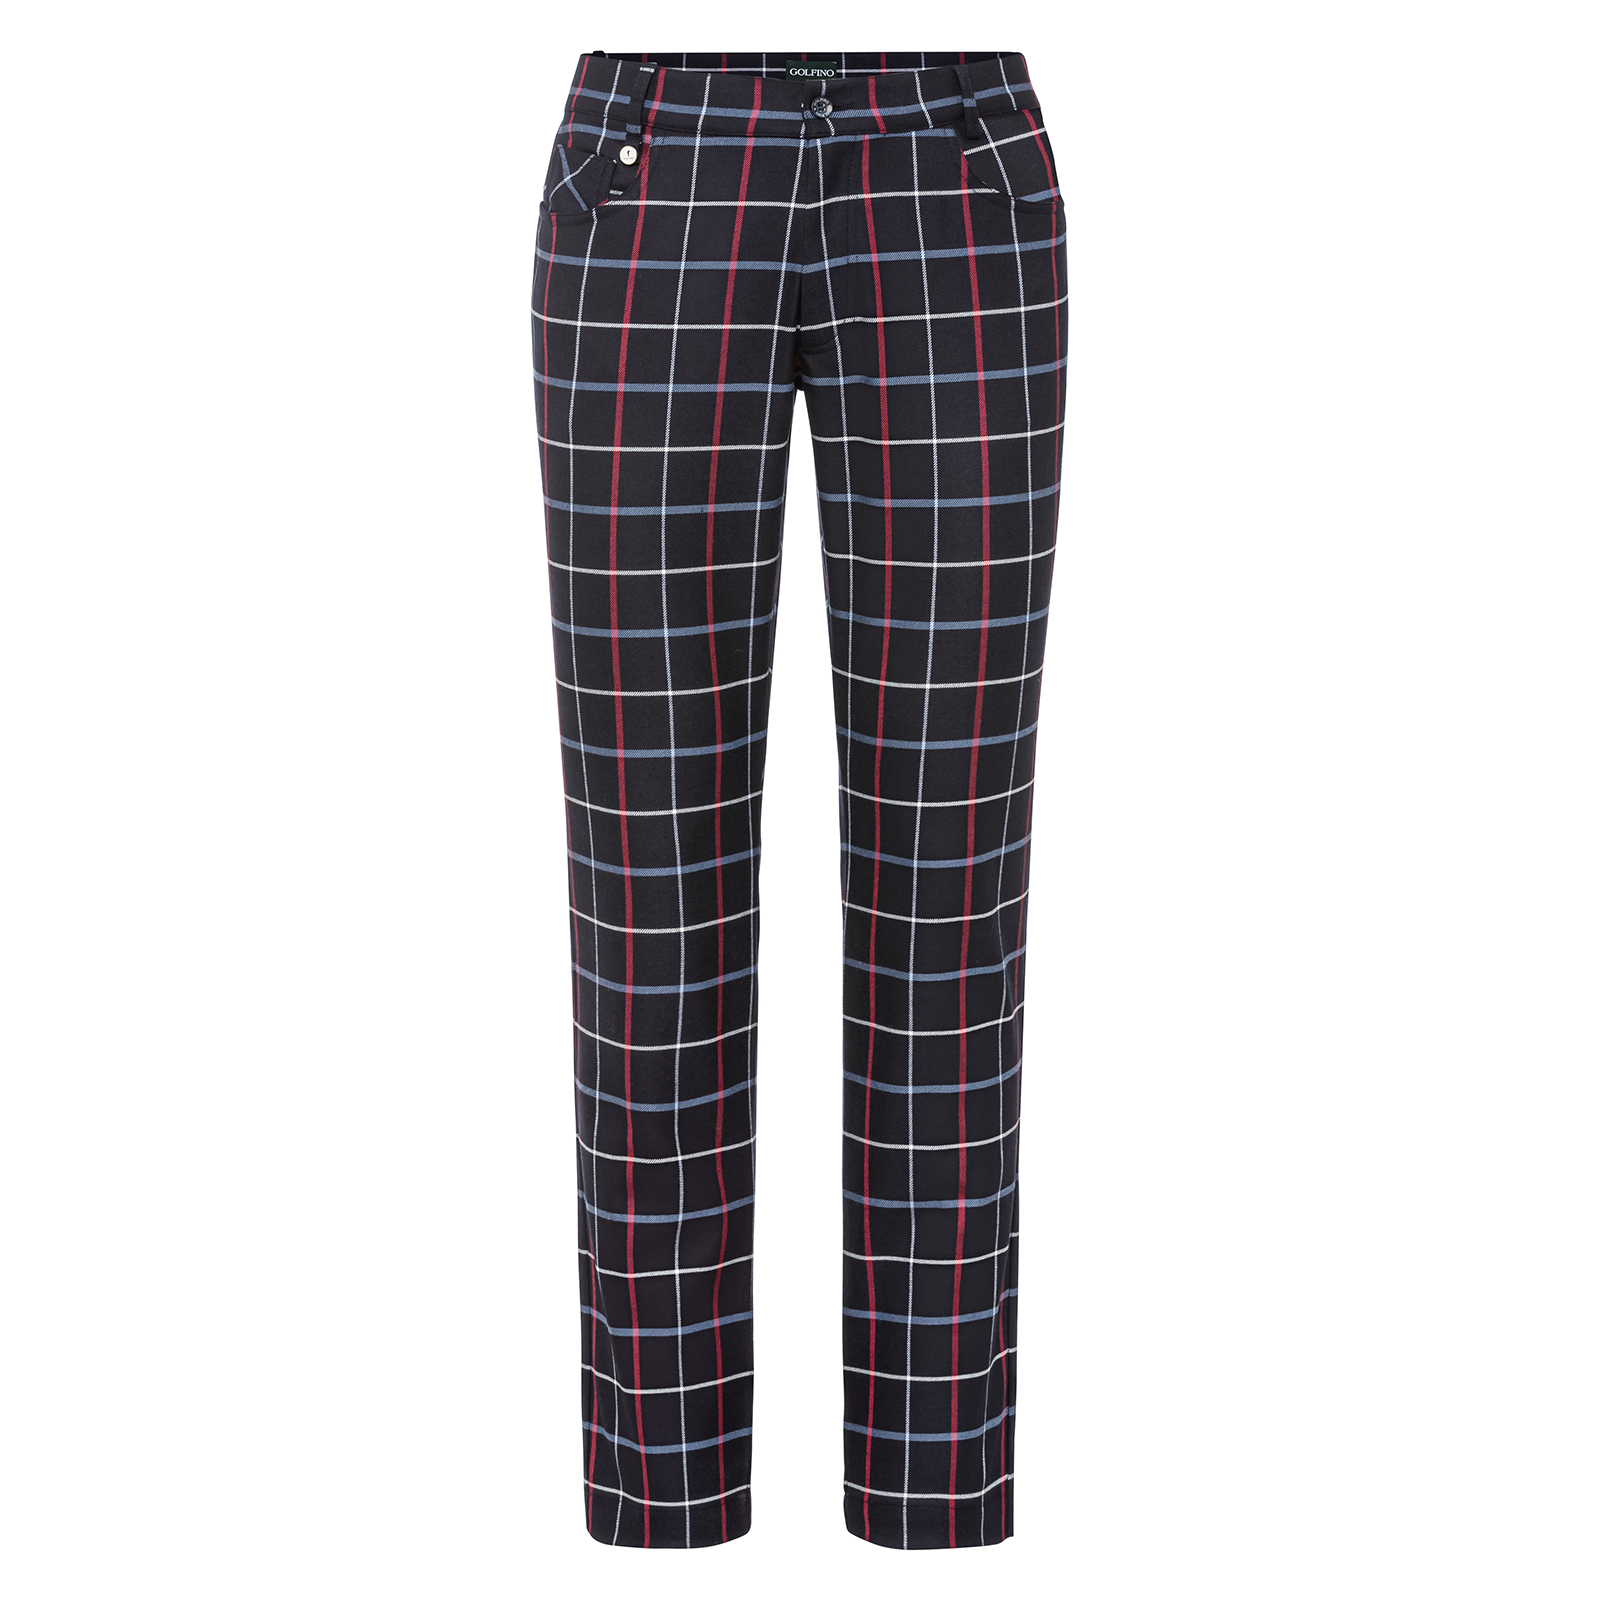 Men's extra slim fit checked golf trousers with viscose